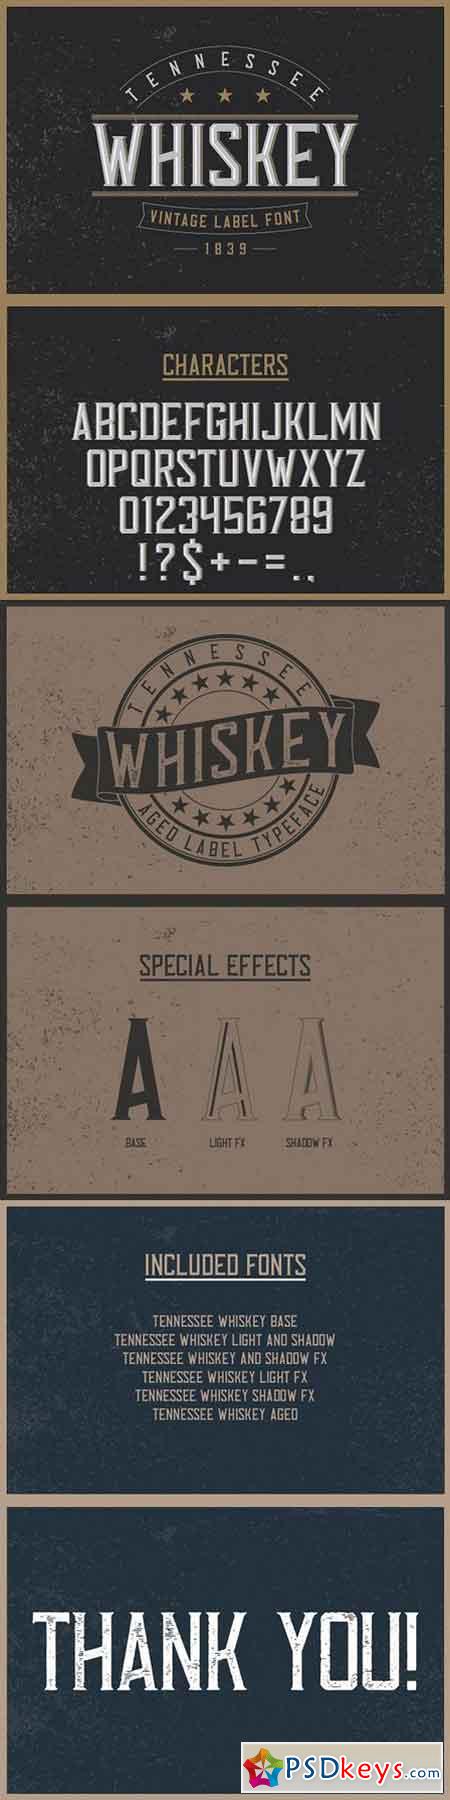 Tennessee Whiskey label font 1343148